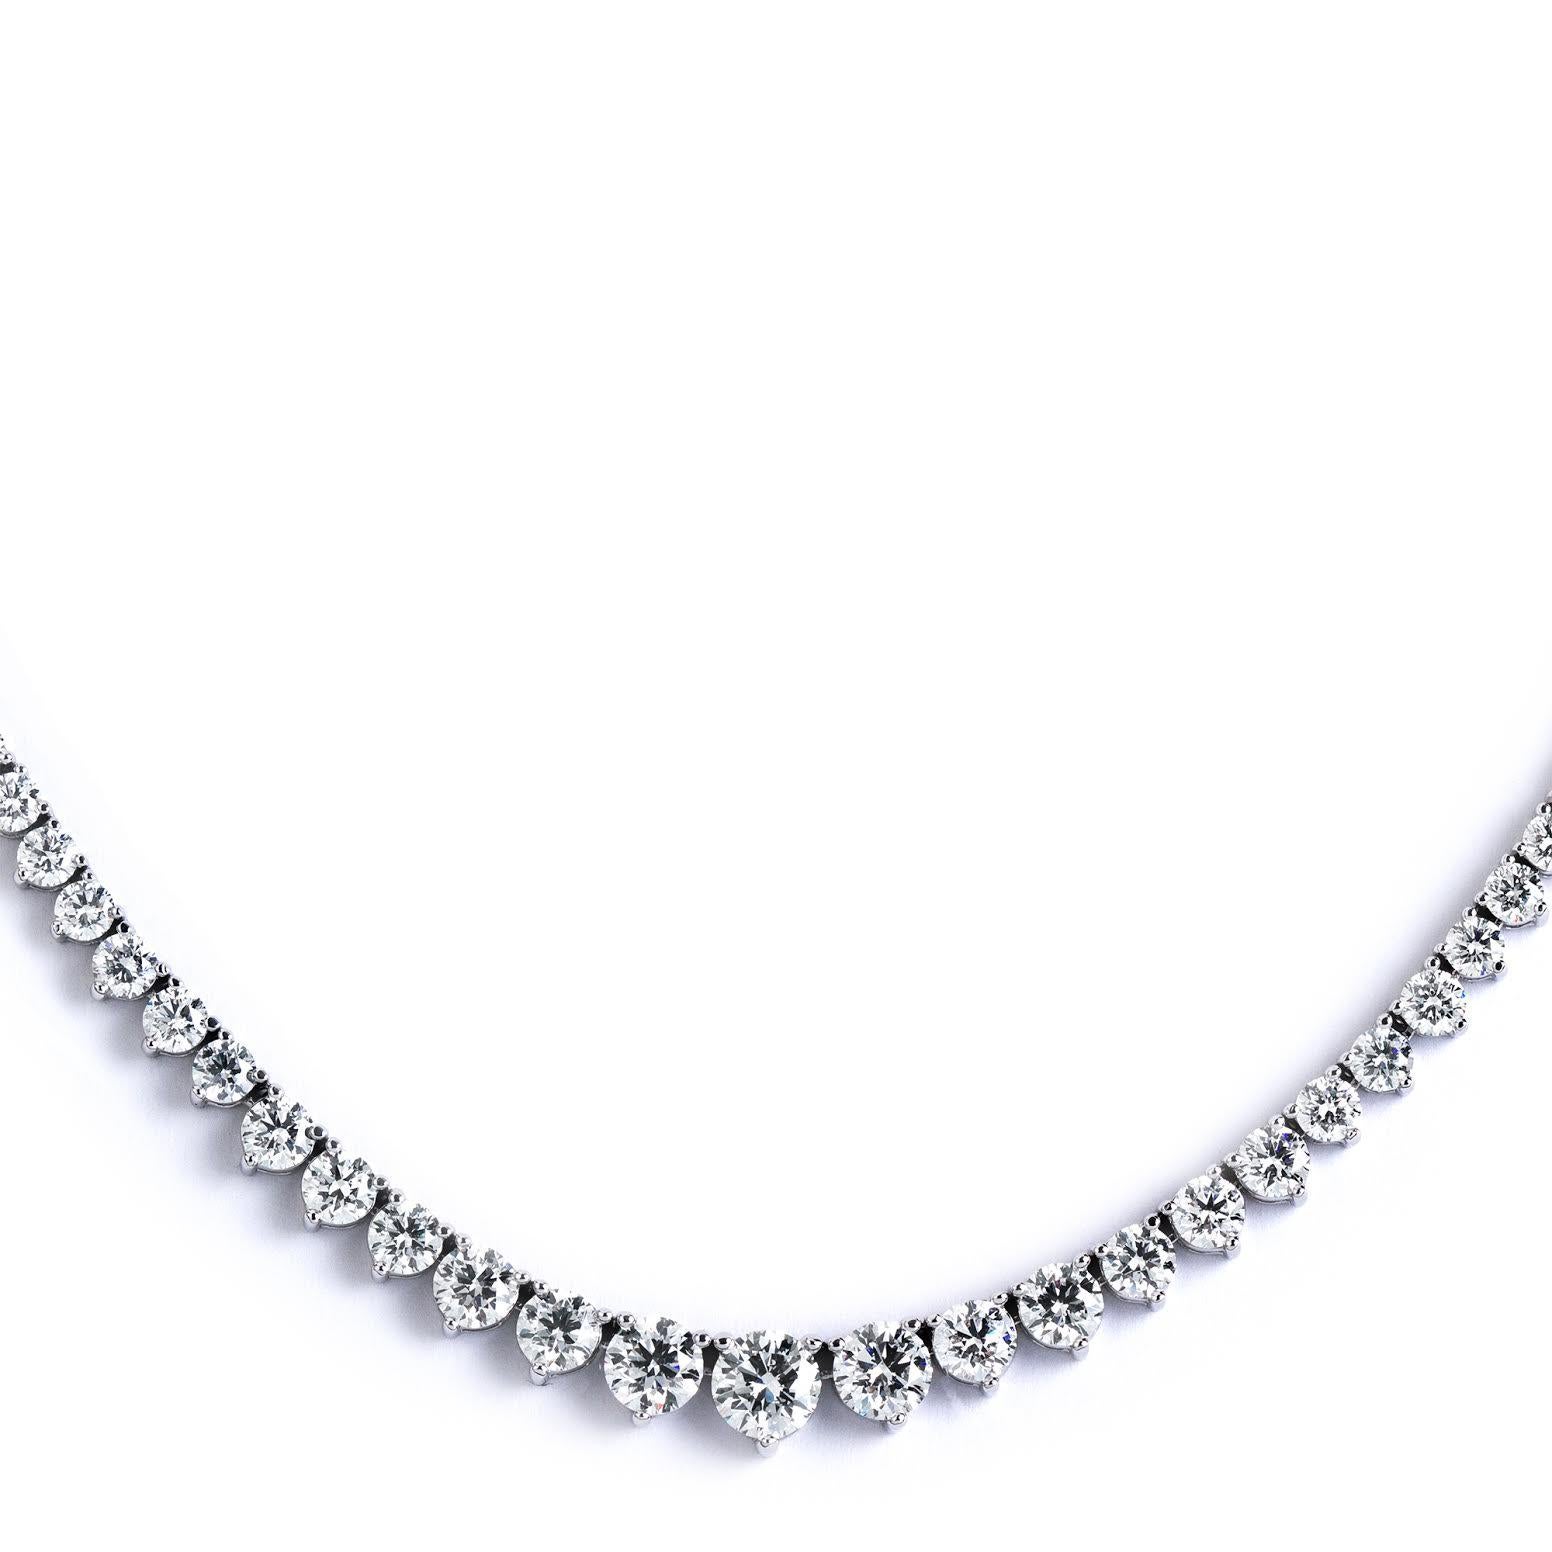 This exquisite graduated riviera necklace set in handmade 18k white gold featuring perfectly cut ideal round brilliant diamonds. the super white diamonds are in E-F color and VVS to VS clarity with a total carat weight of 10.67.
The center stone is